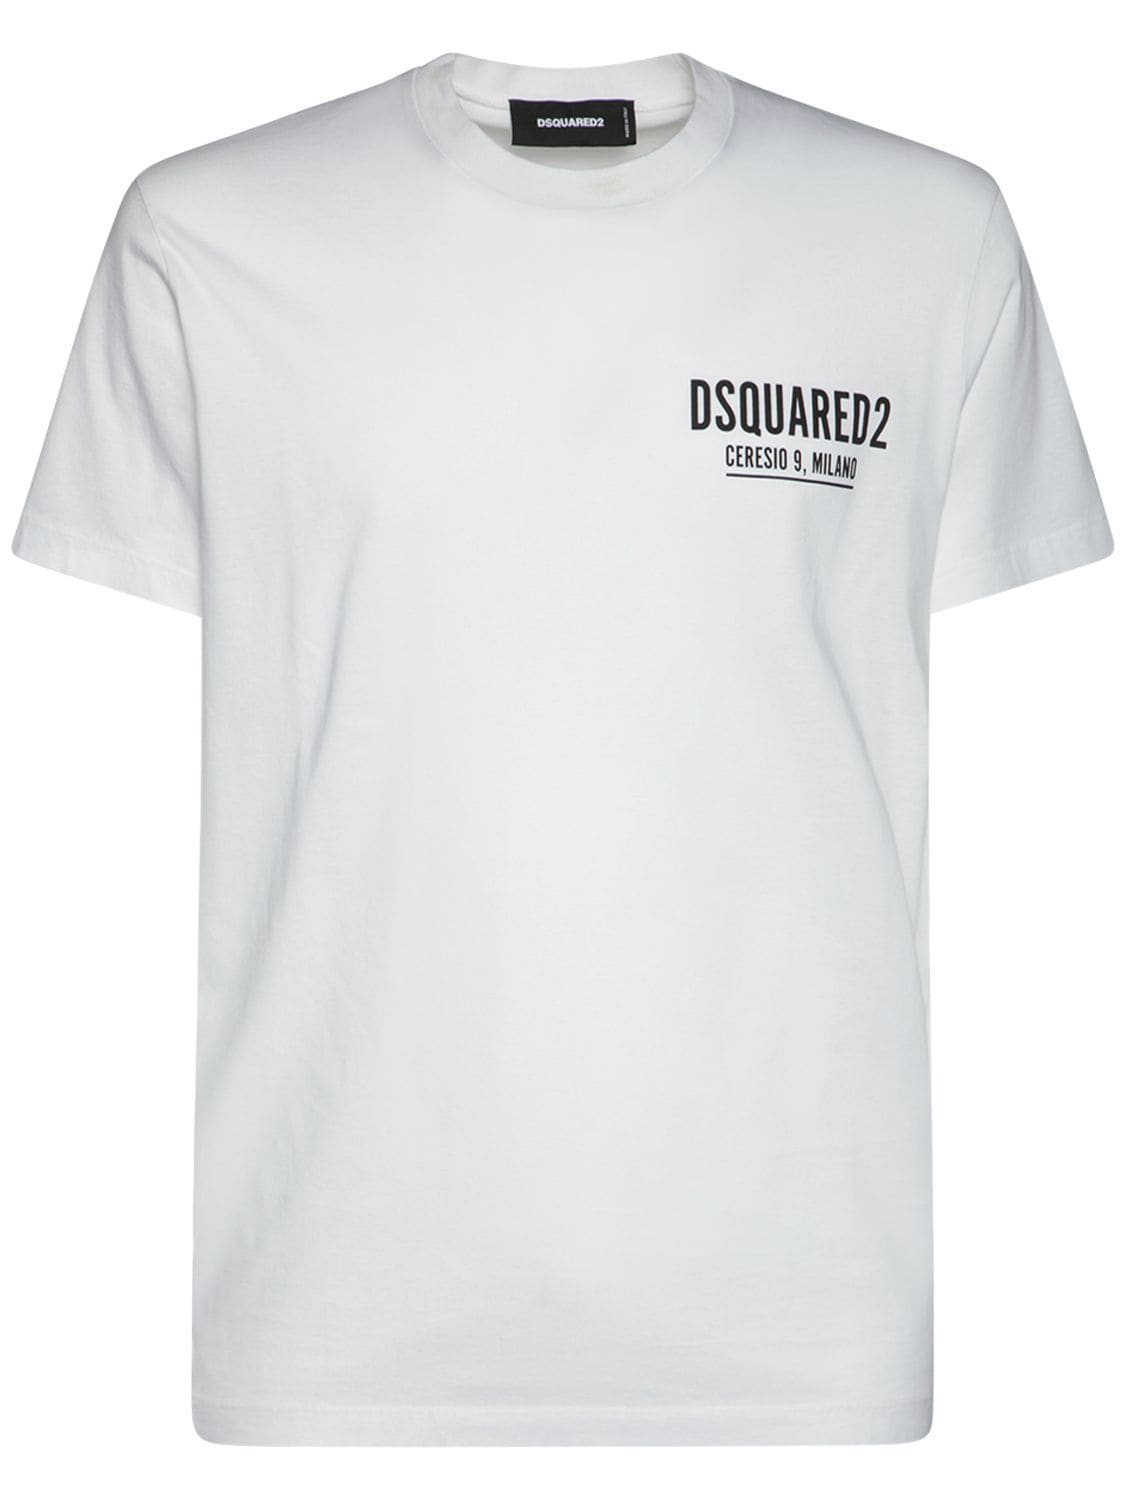 Dsquared2 Ceresio 9 Print Jersey T-shirt In White